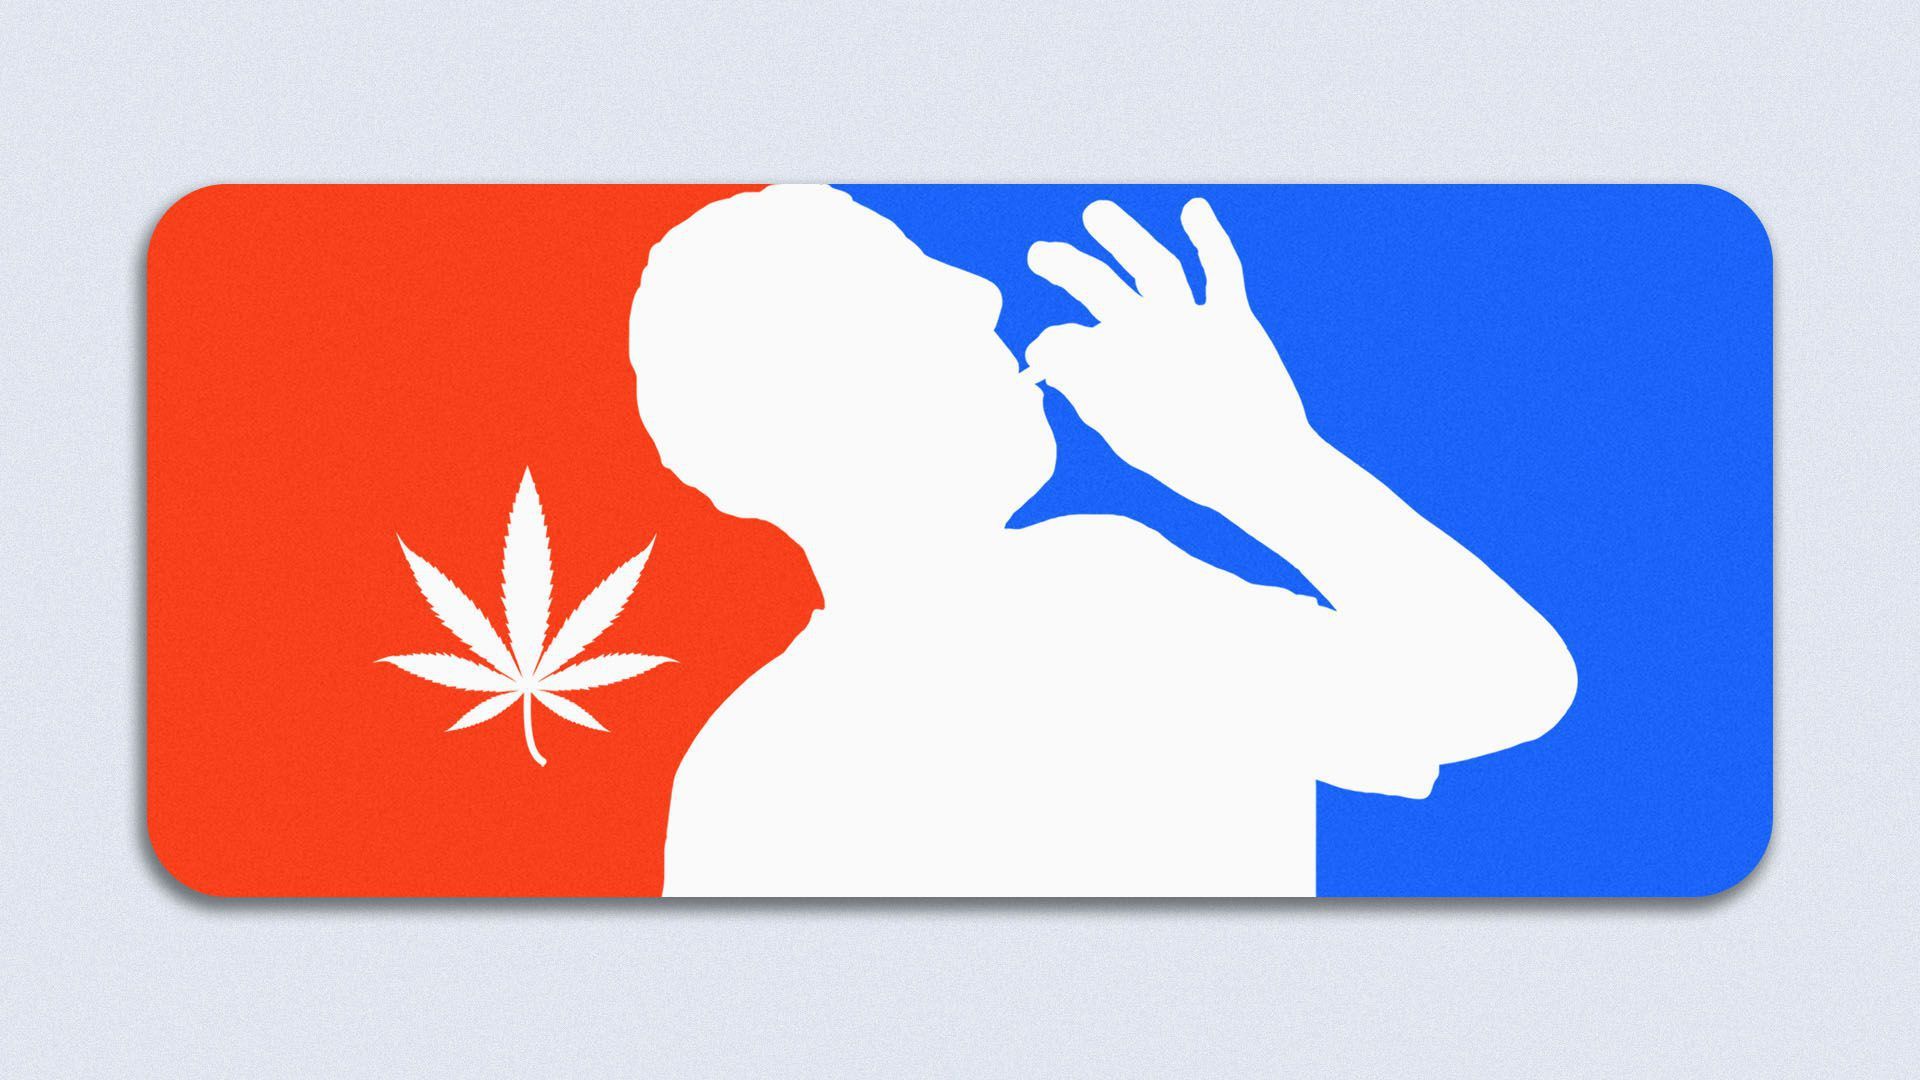 Illustration of a silhouette of someone smoking weed